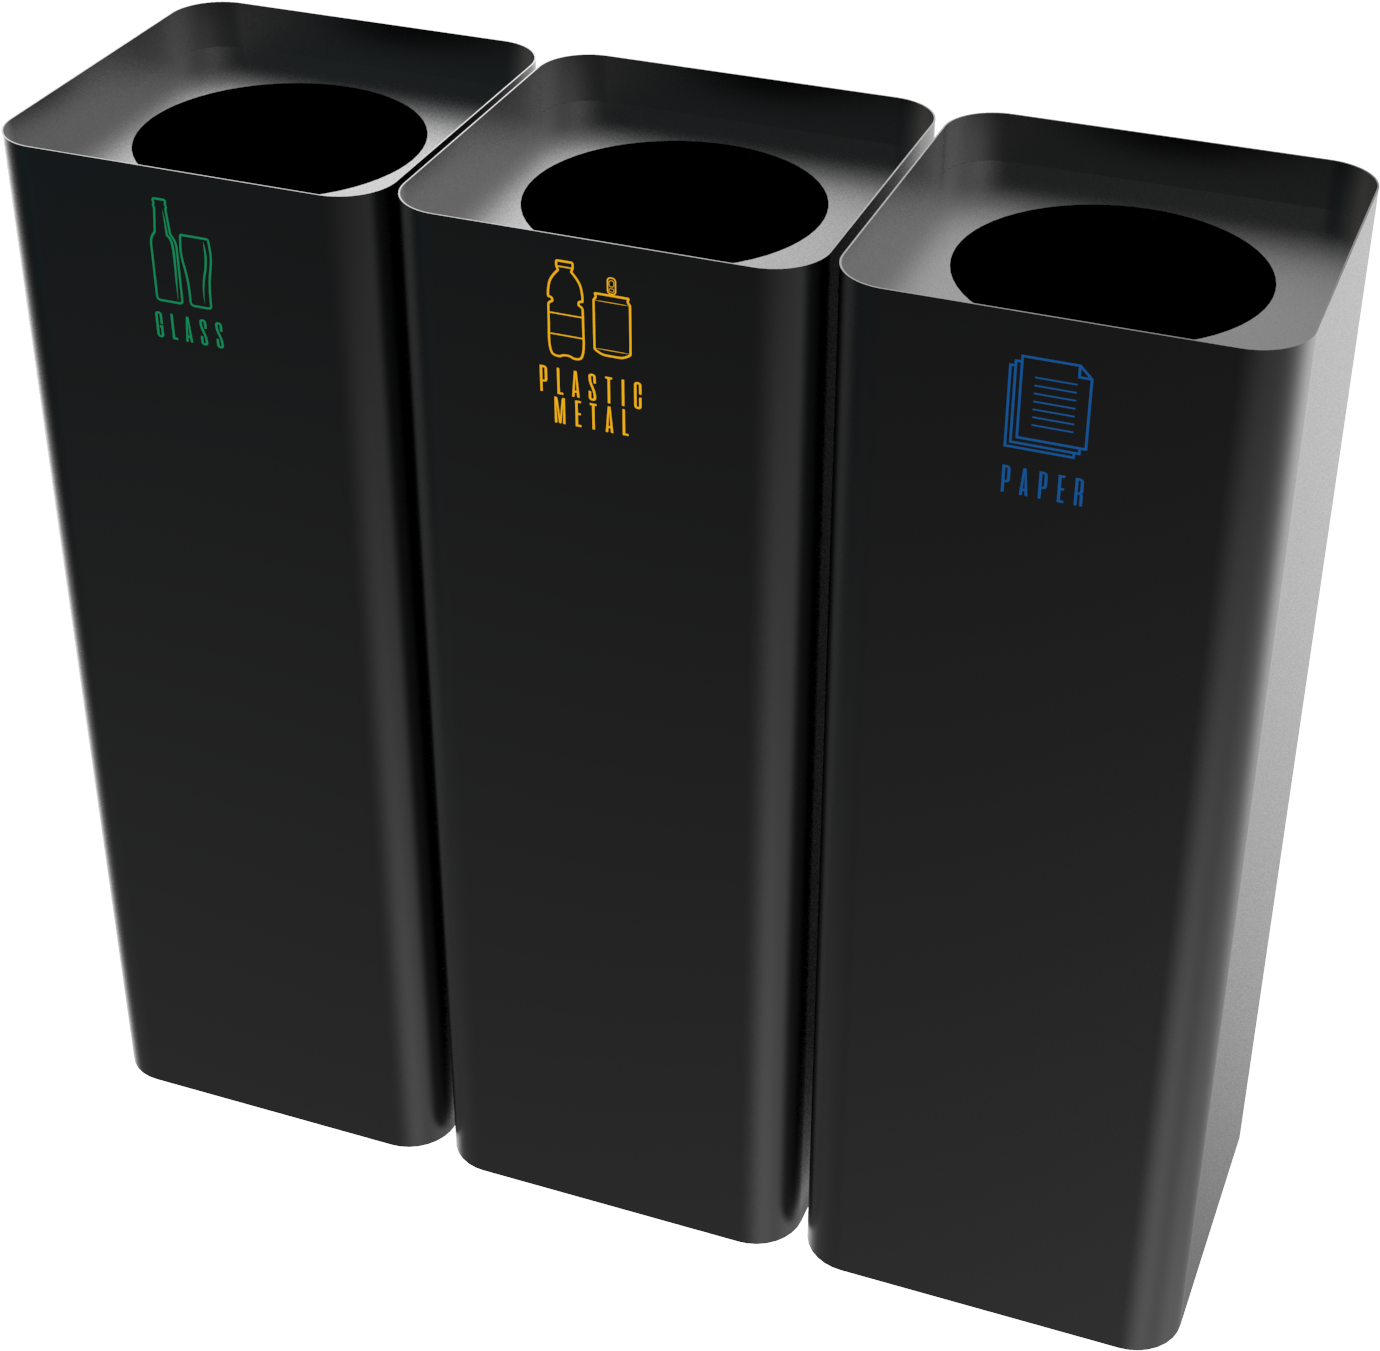 Recycling Bins Separation Glass Plastic Paper PNG image